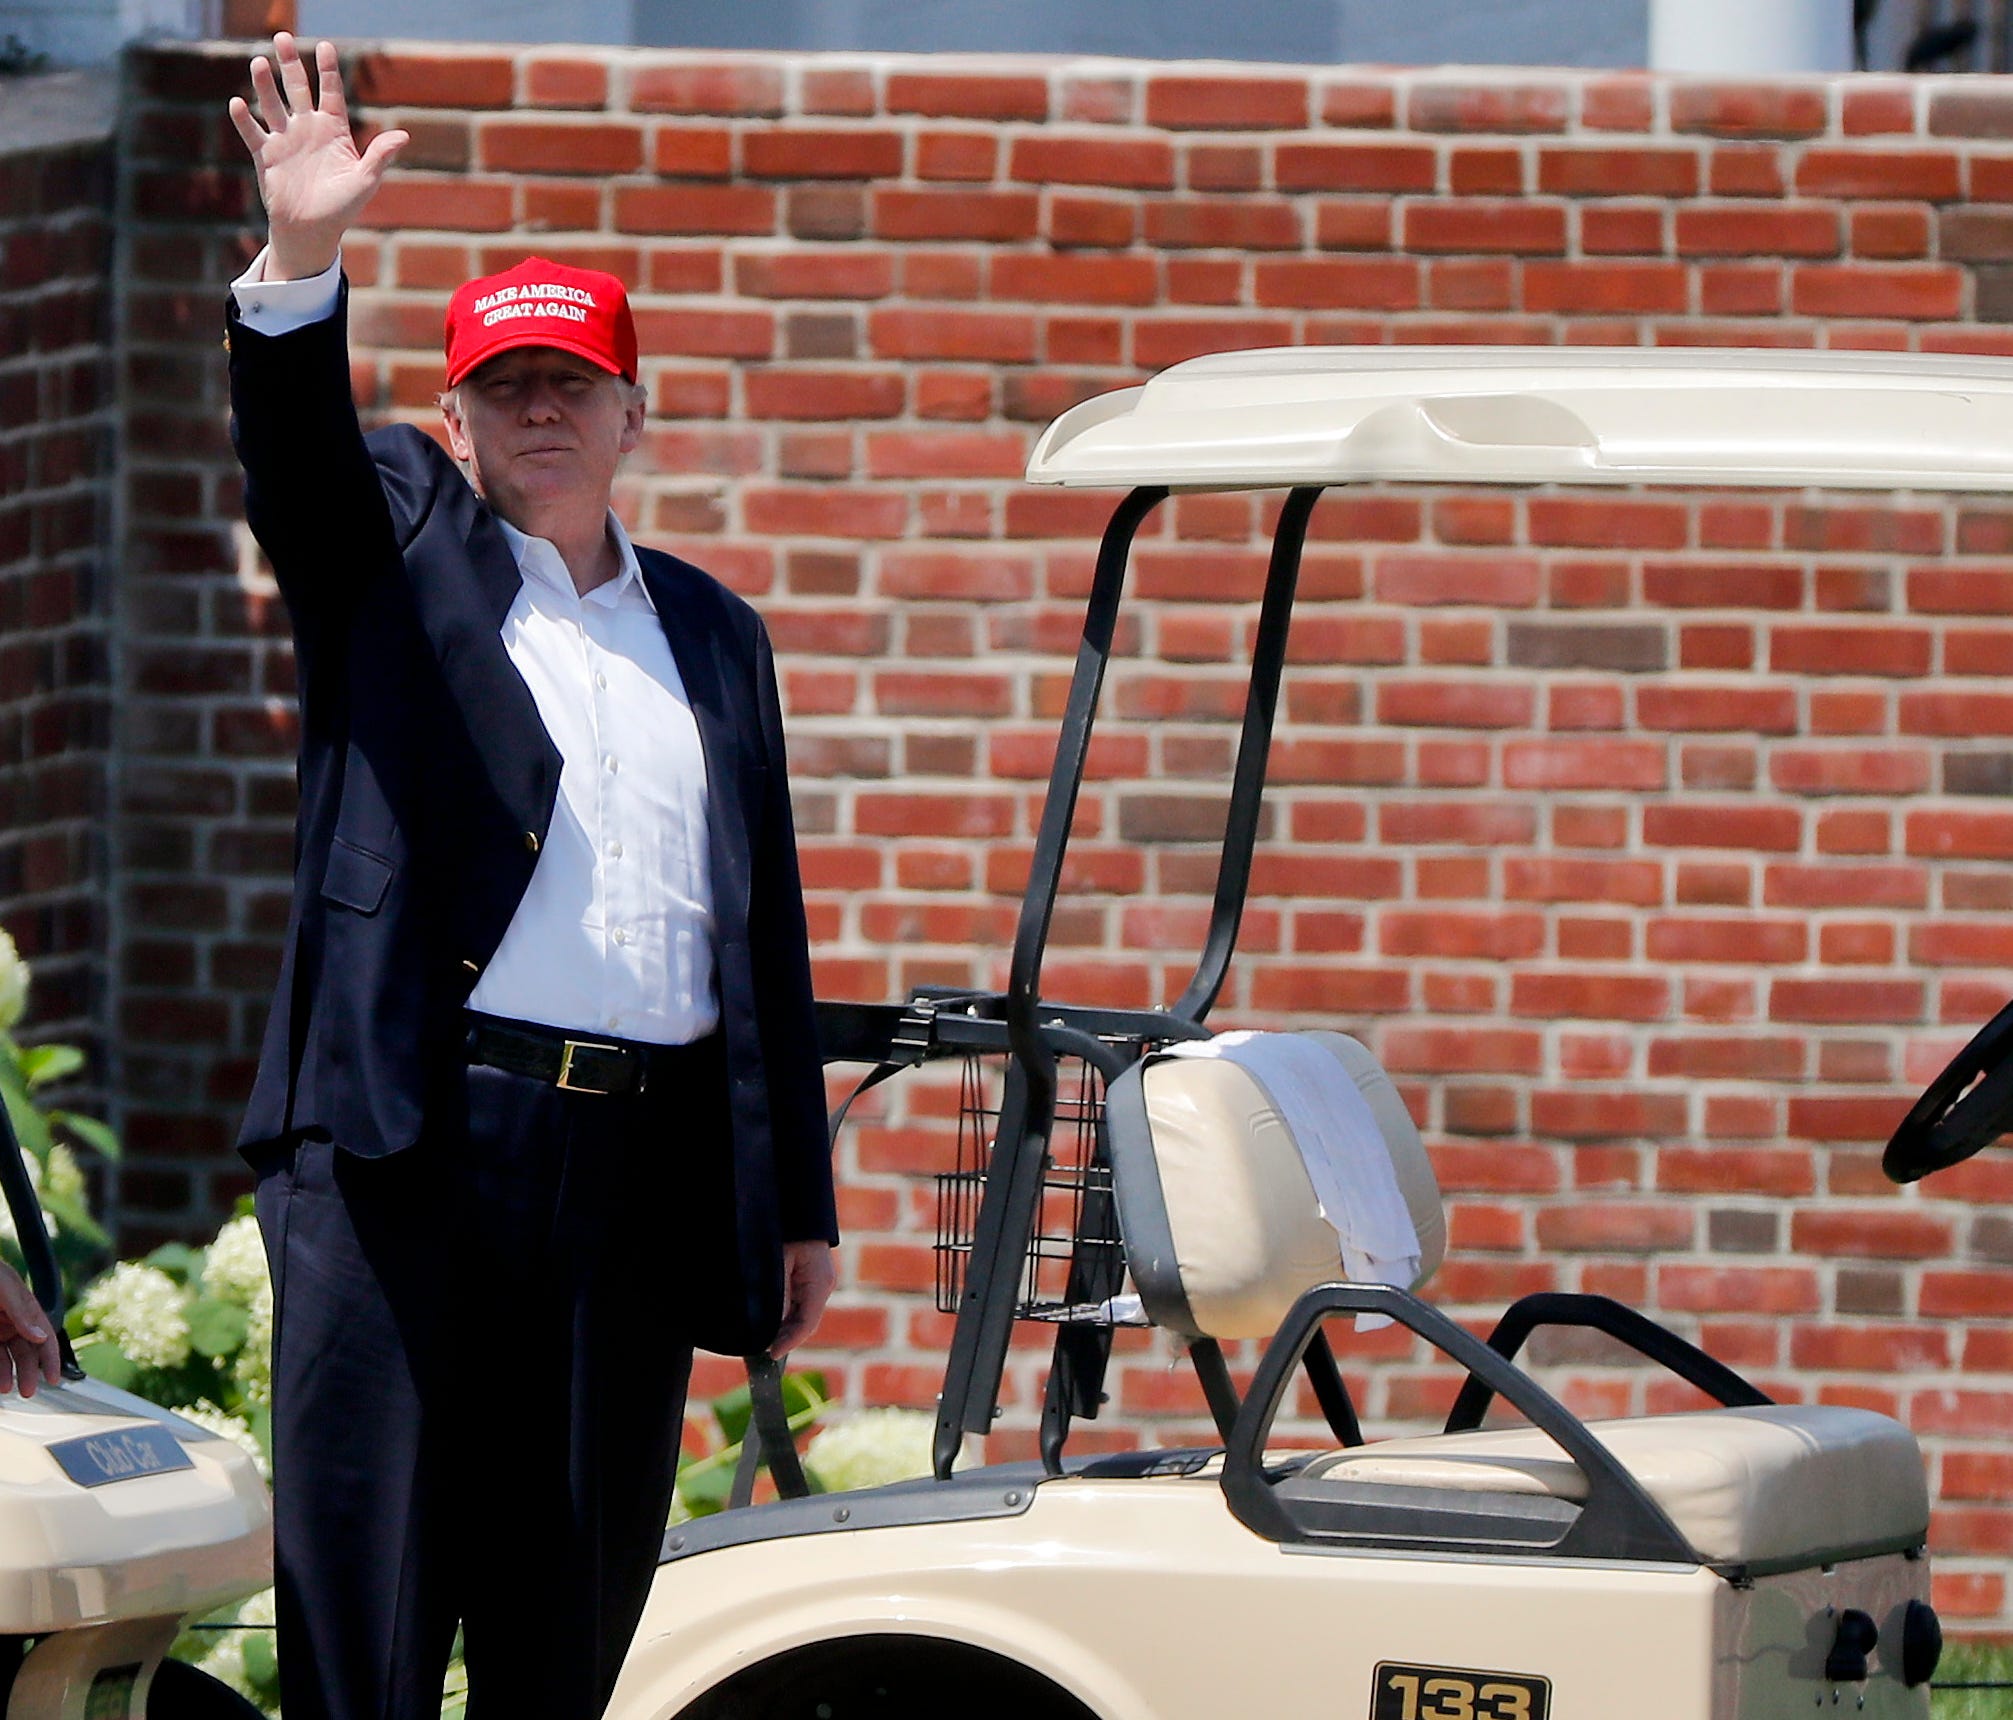 President Trump waves to spectators as he walks out of his residence at the Trump National Golf Club during the third round of the U.S. Women's Open Golf tournament, July 15, 2017, in Bedminster, N.J. (